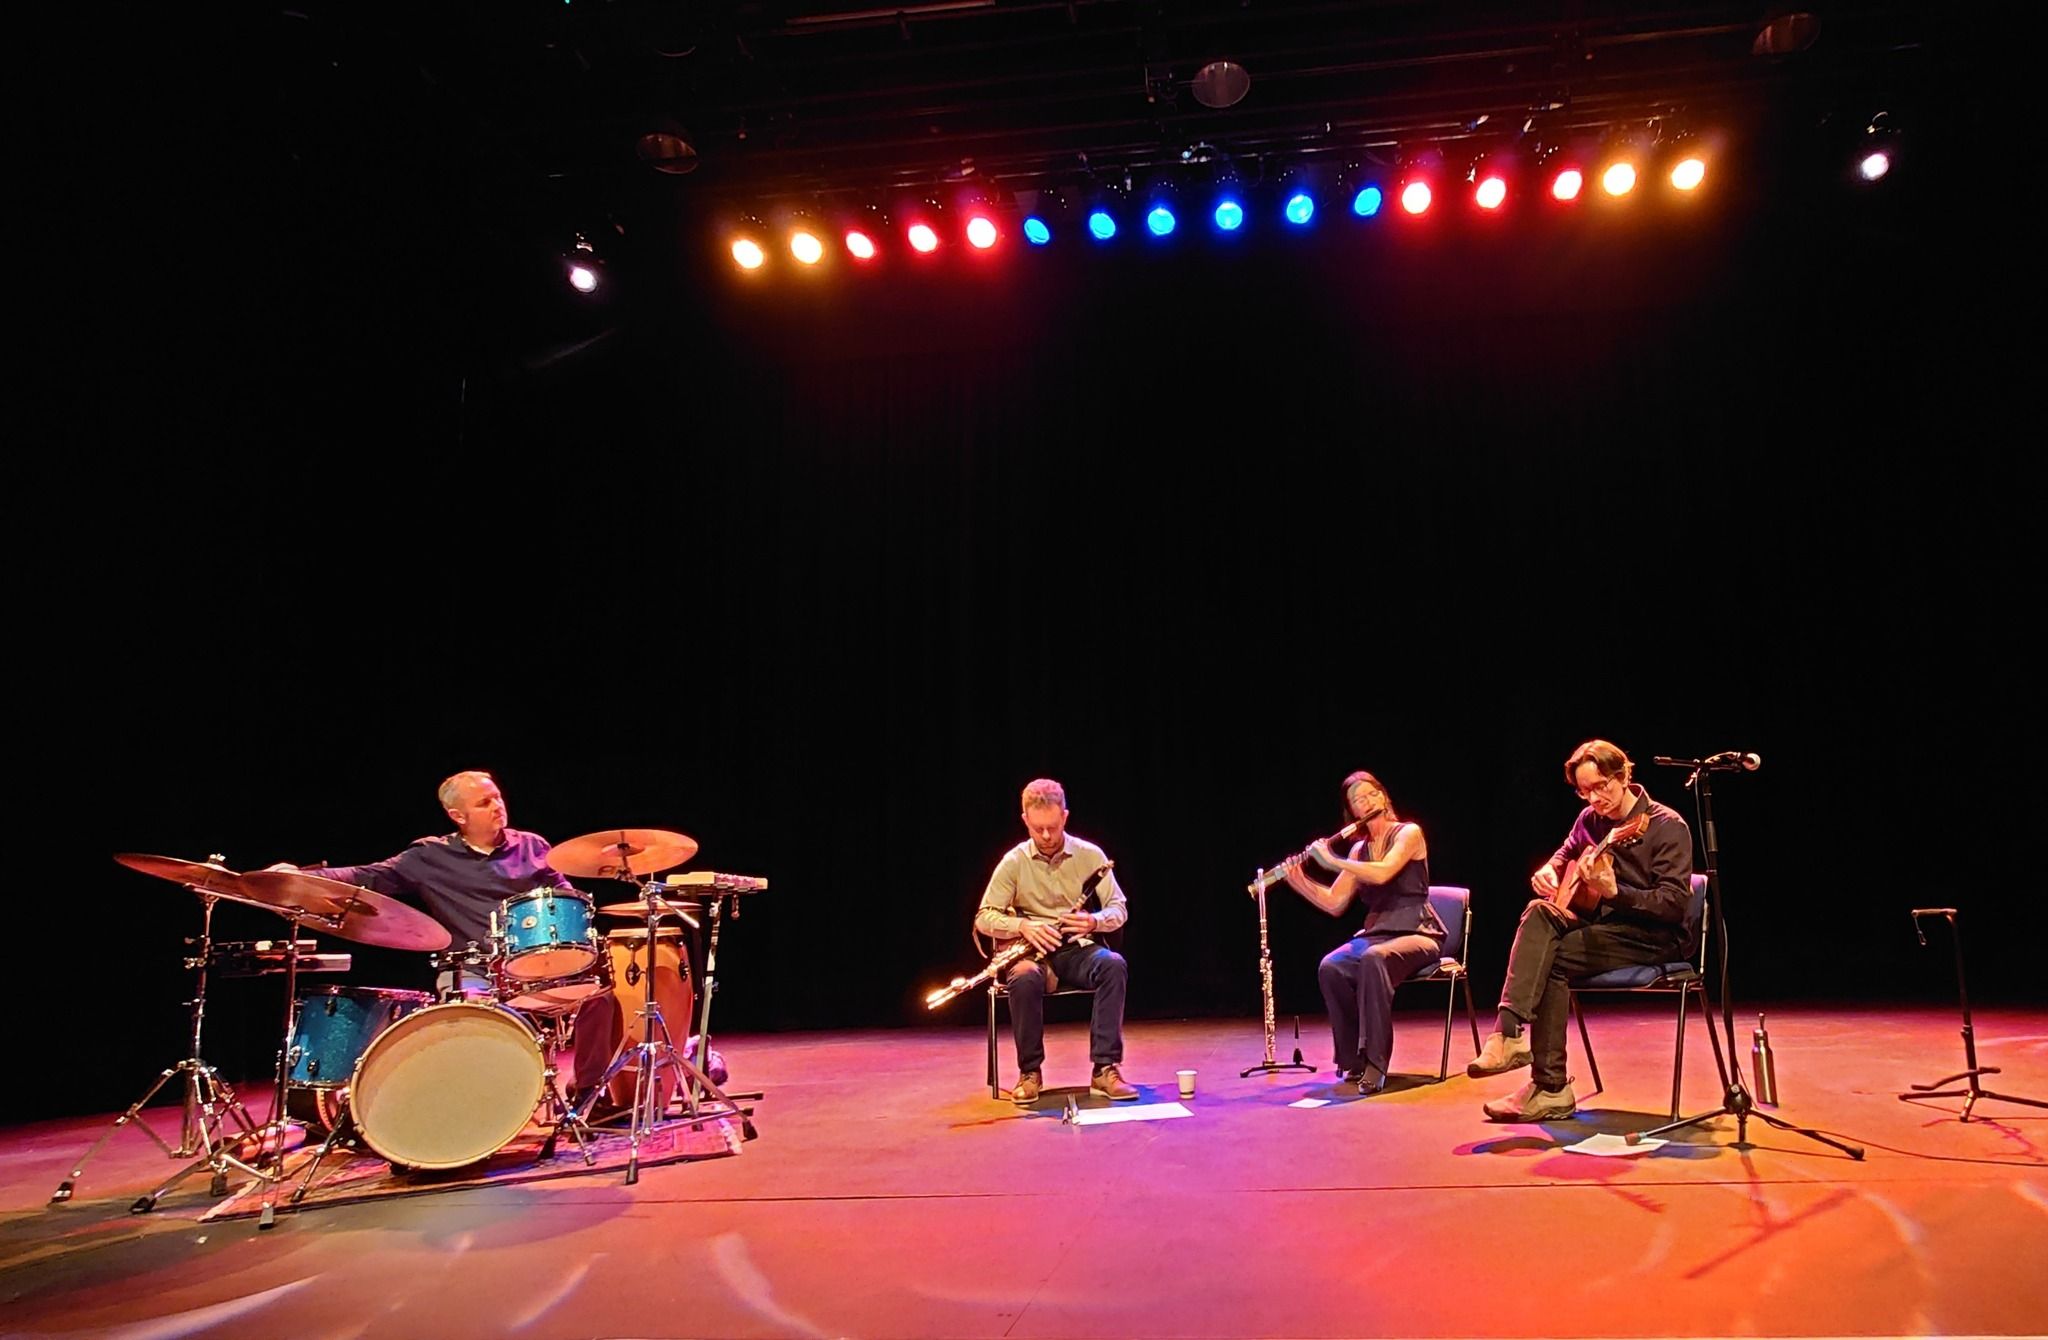 Photograph for the post IMO Chamber Group perform at the Mermaid Arts Centre in Bray.